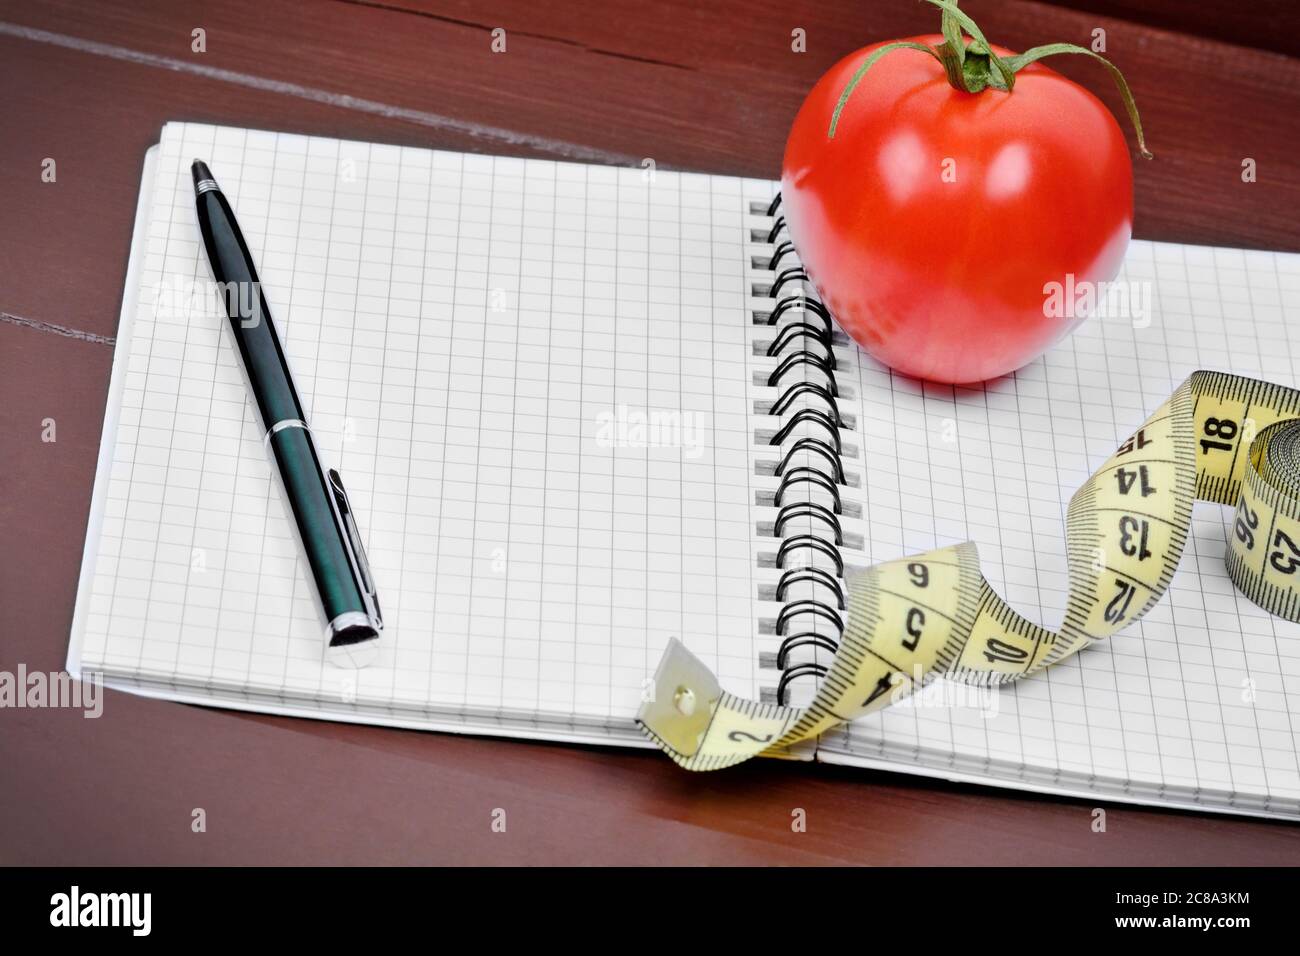 Close up of notebook with pen, centimeter and cherry tomato on table Stock Photo